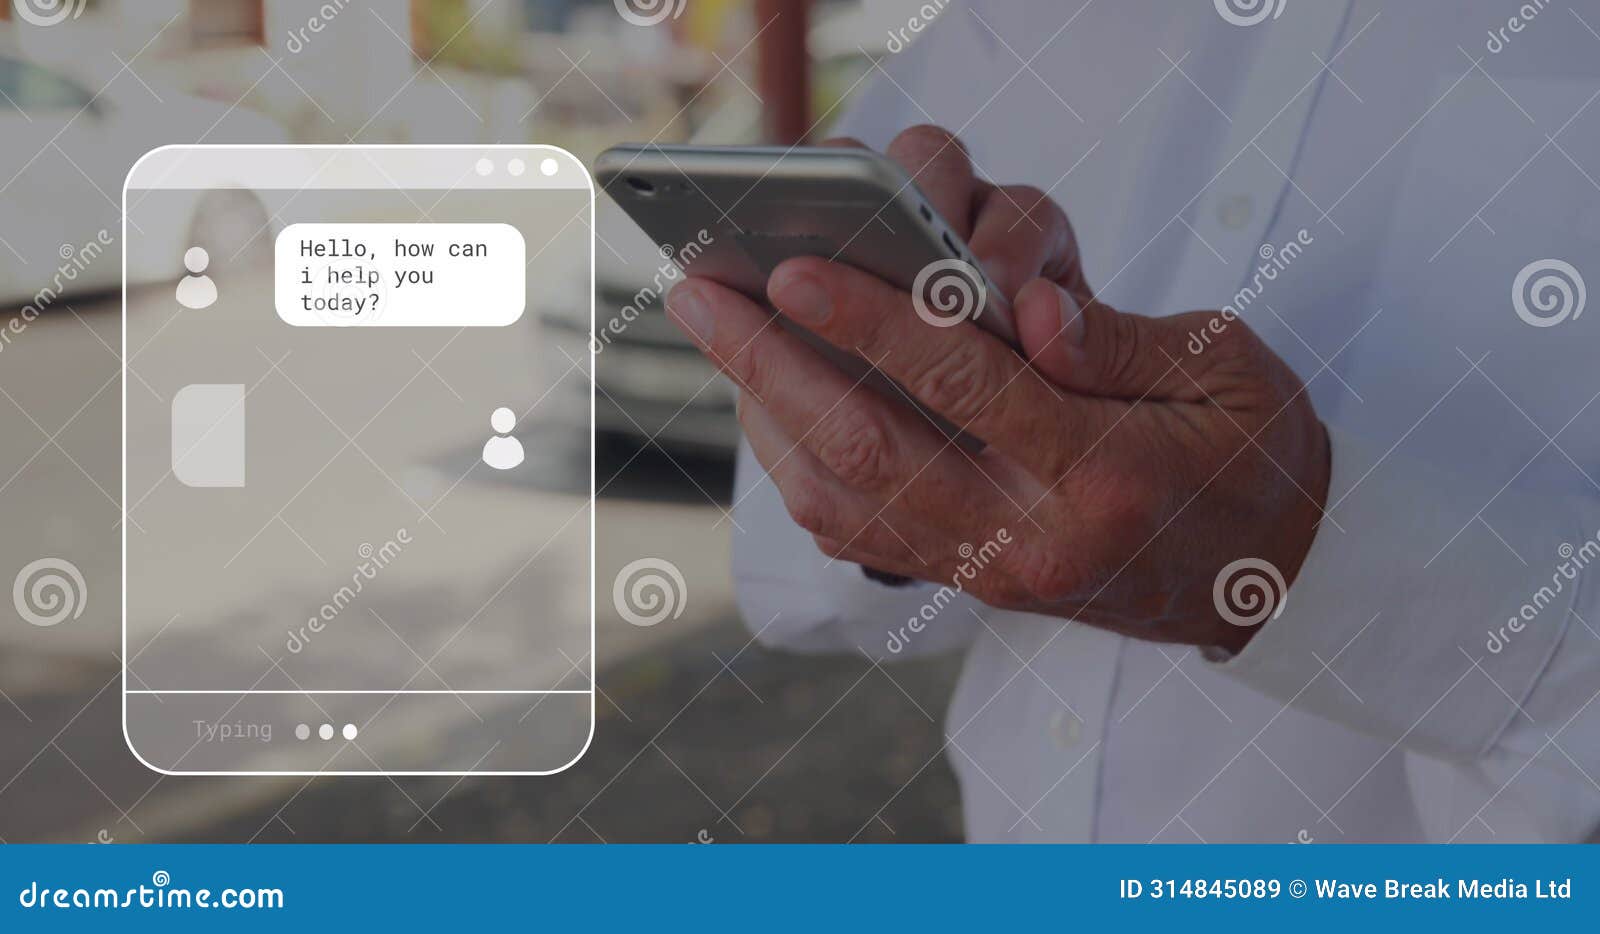 image of digital interface with online communicator over man using smartphone